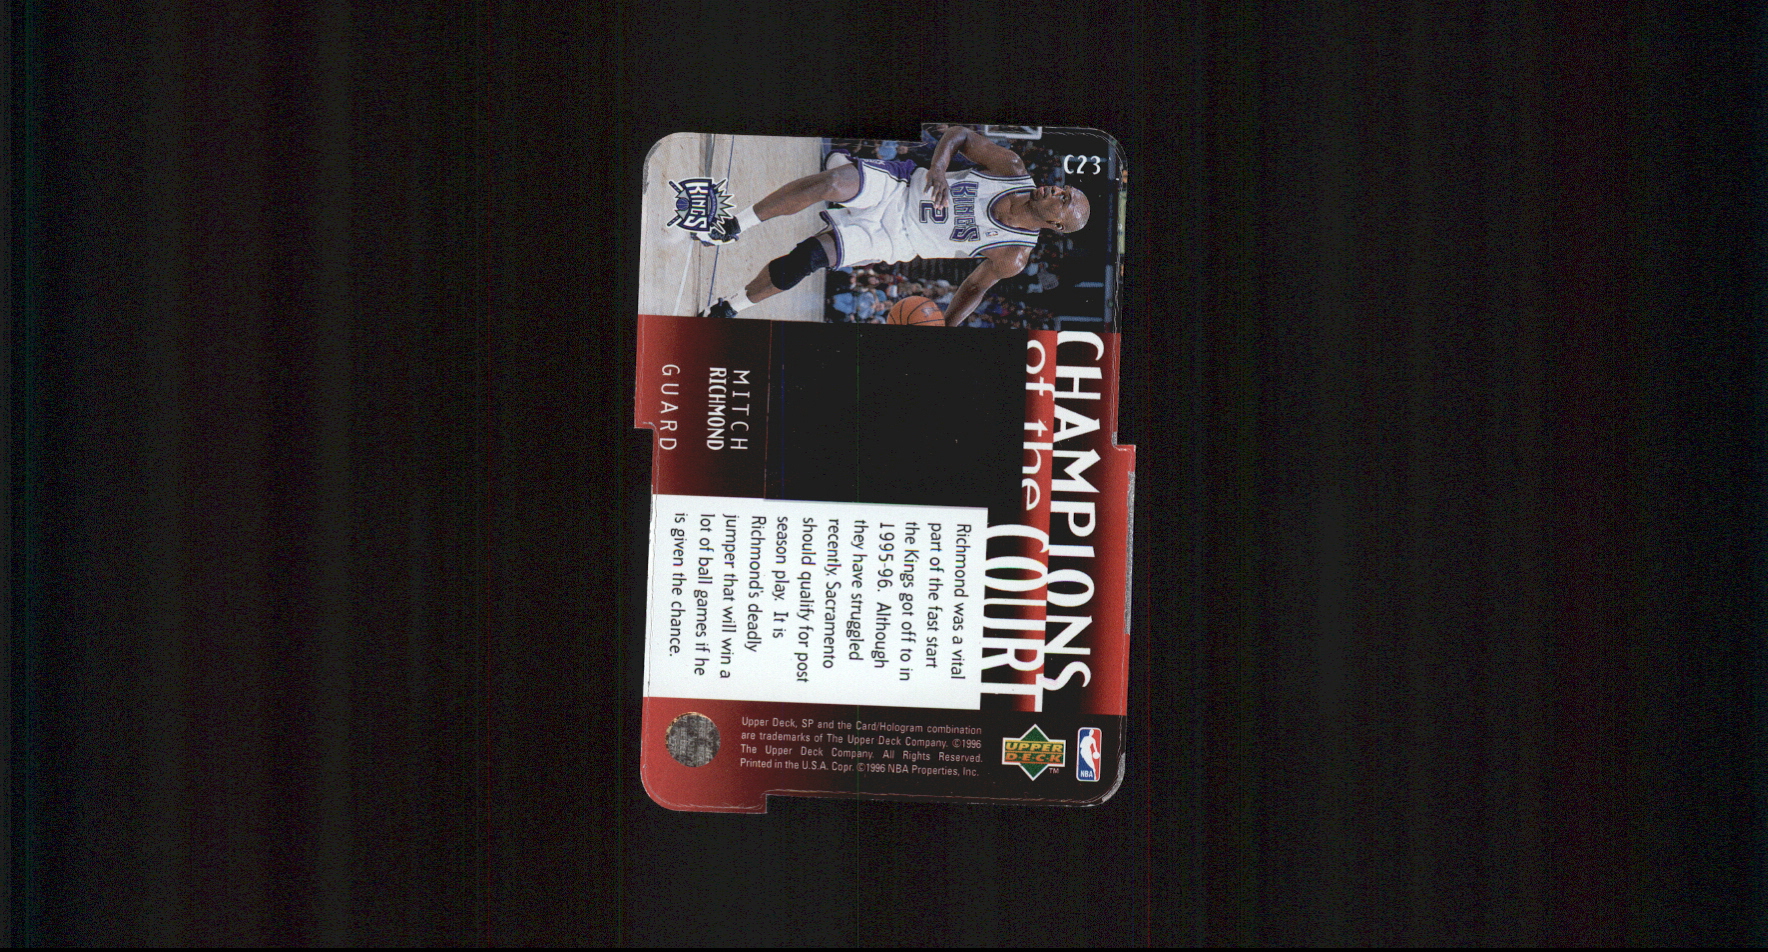 1995-96 SP Championship Champions of the Court Die Cuts #C23 Mitch Richmond back image